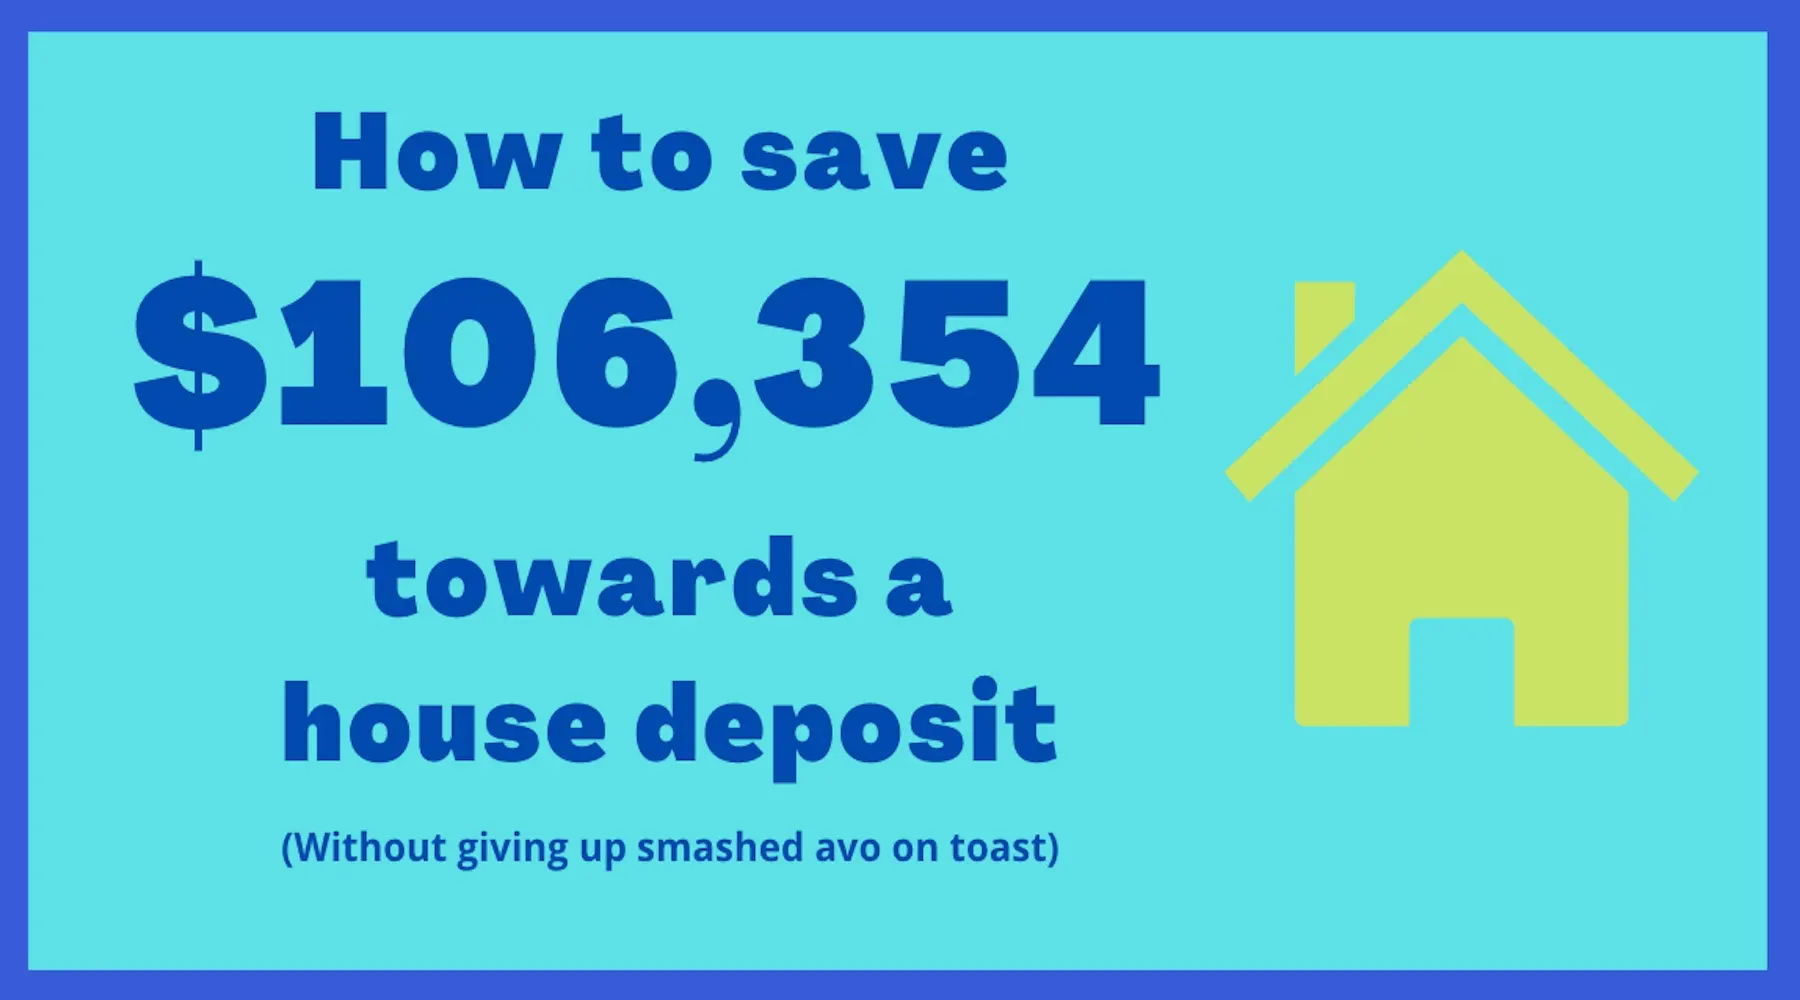 Proven way for millennials to save a $100,000 home deposit | finder.com.au